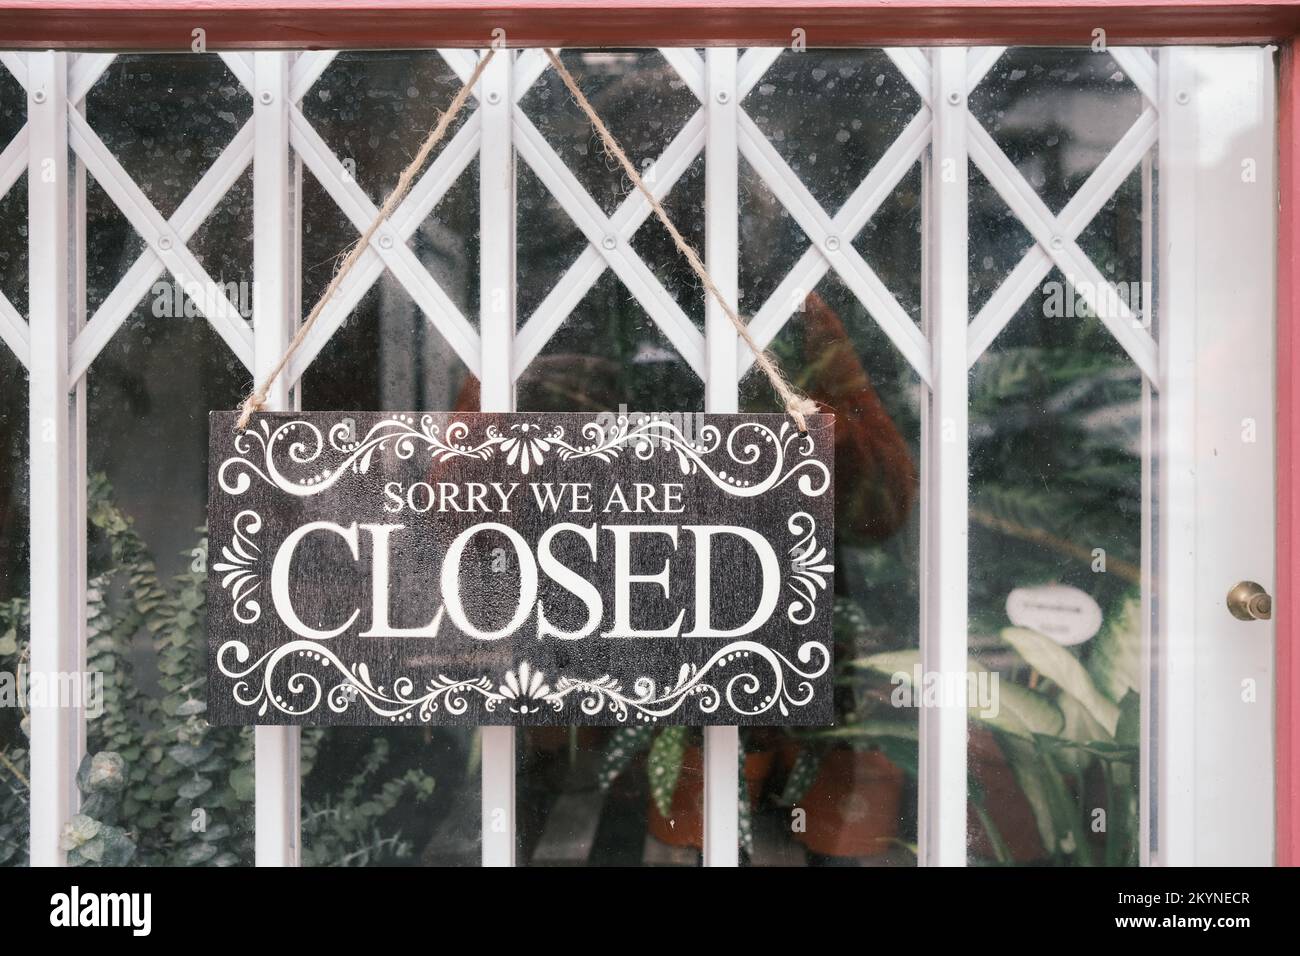 Sorry We Are Closed Sign on a Shop. Stock Photo